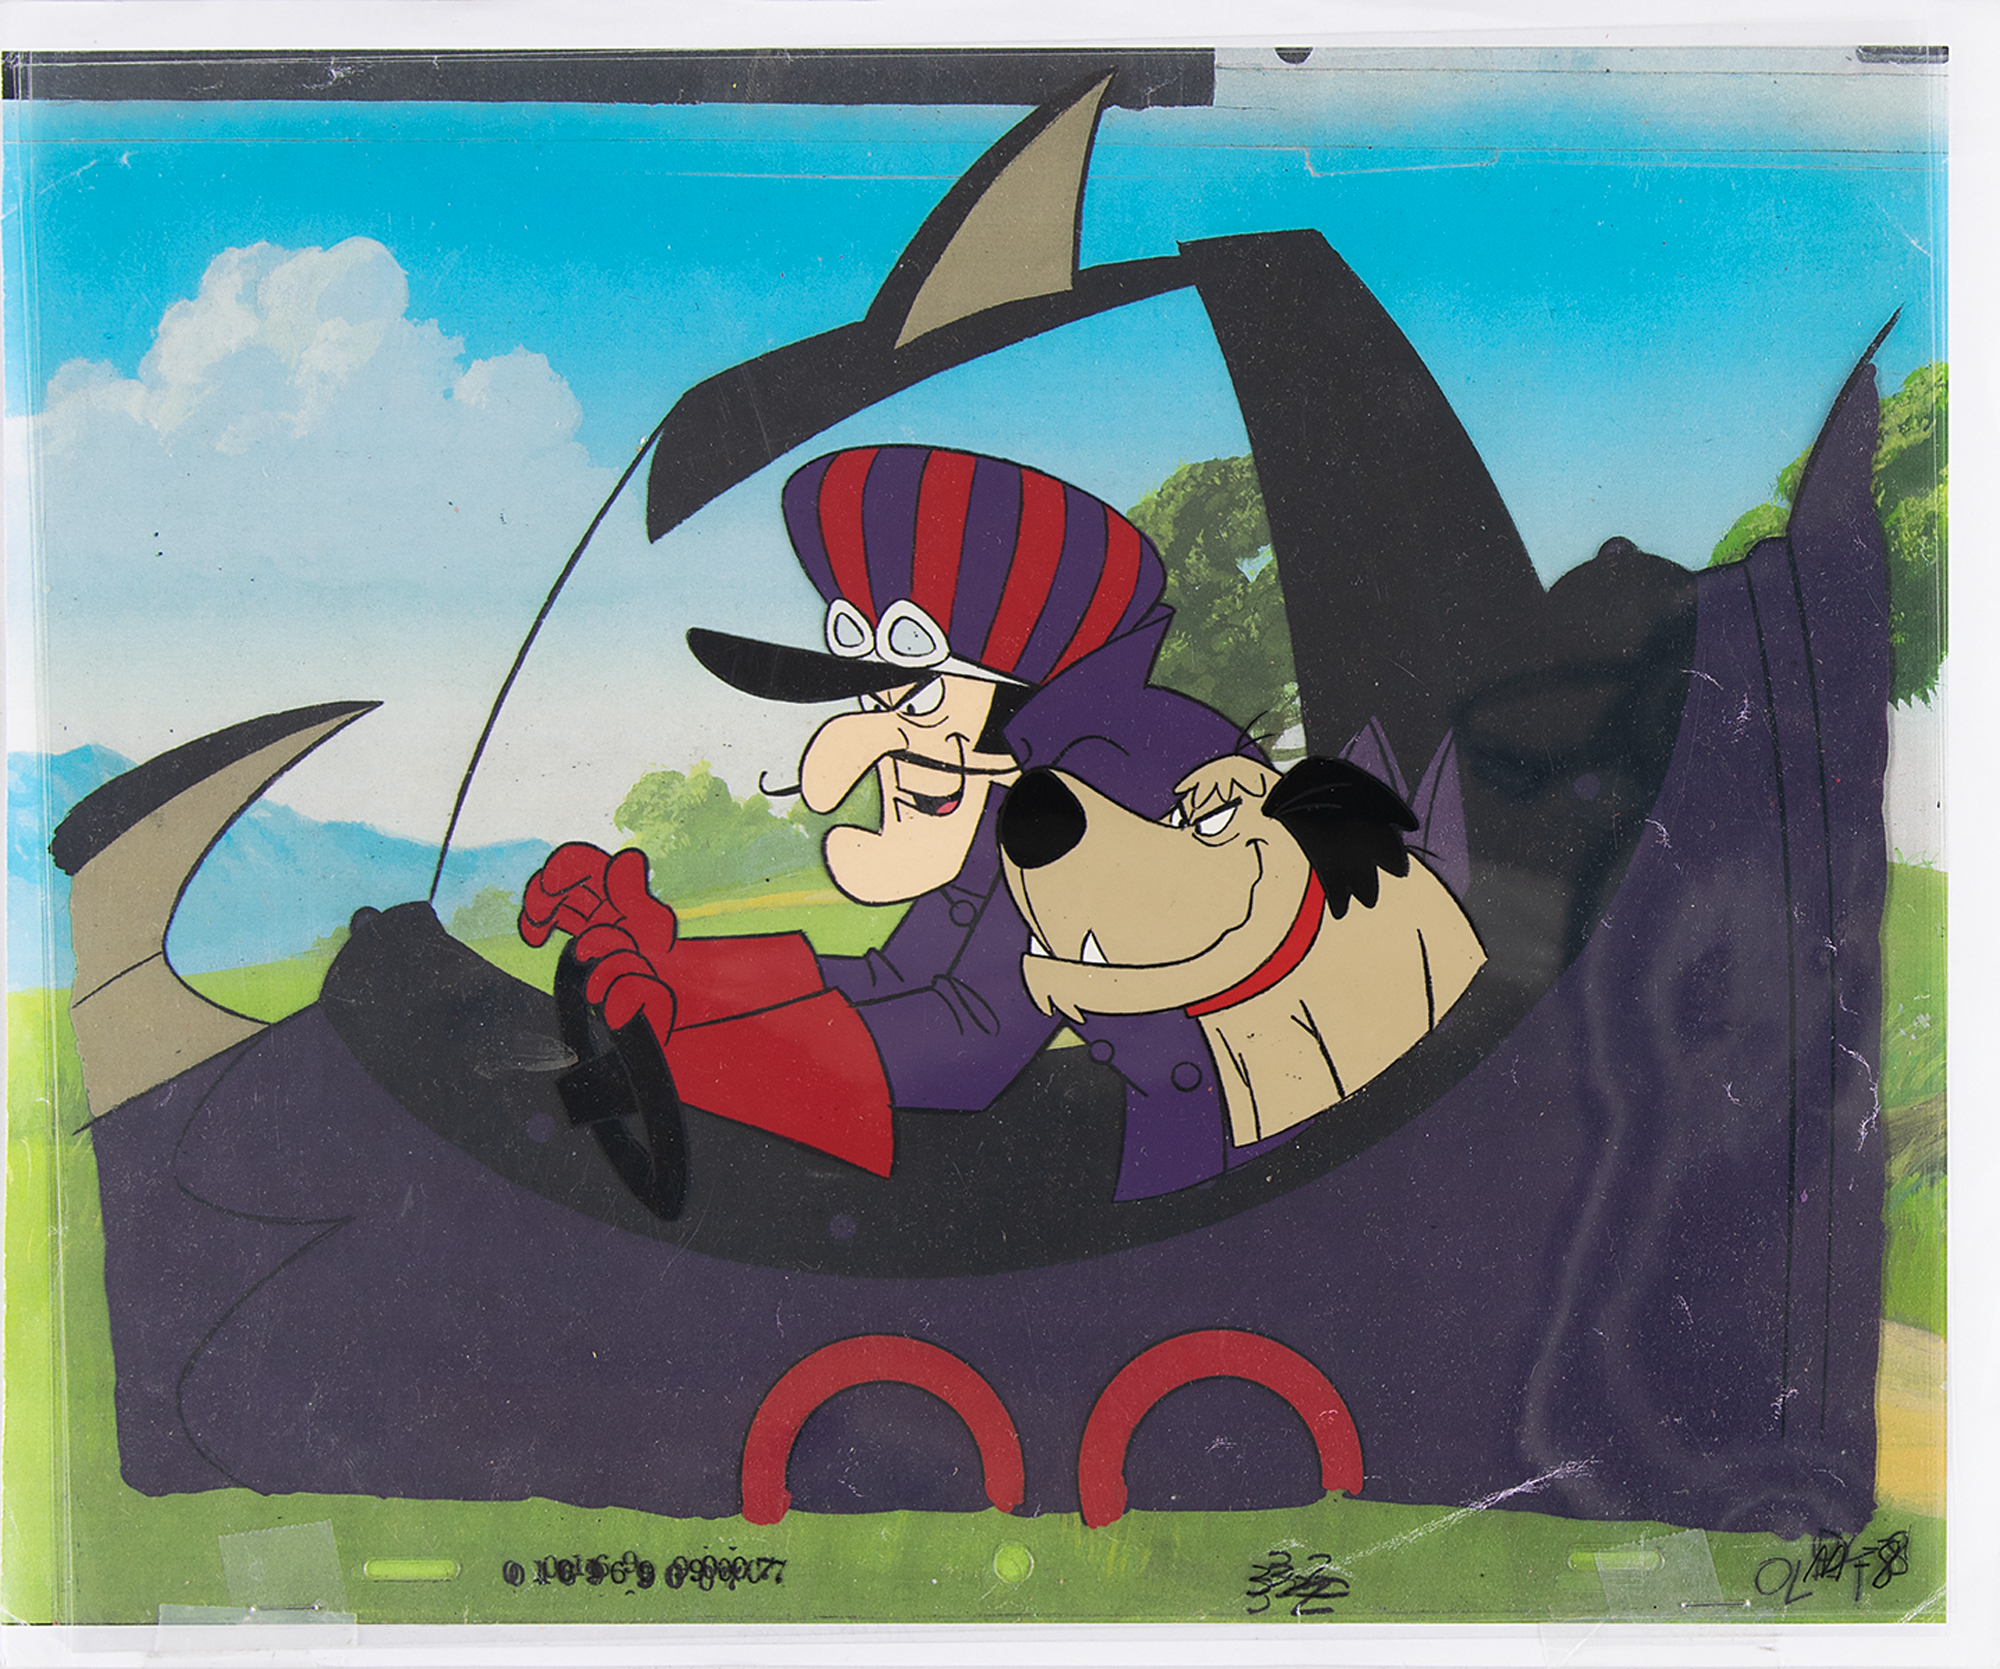 Lot #849 Dick Dastardly and Muttley key master laser background cel set-up from Wacky Races